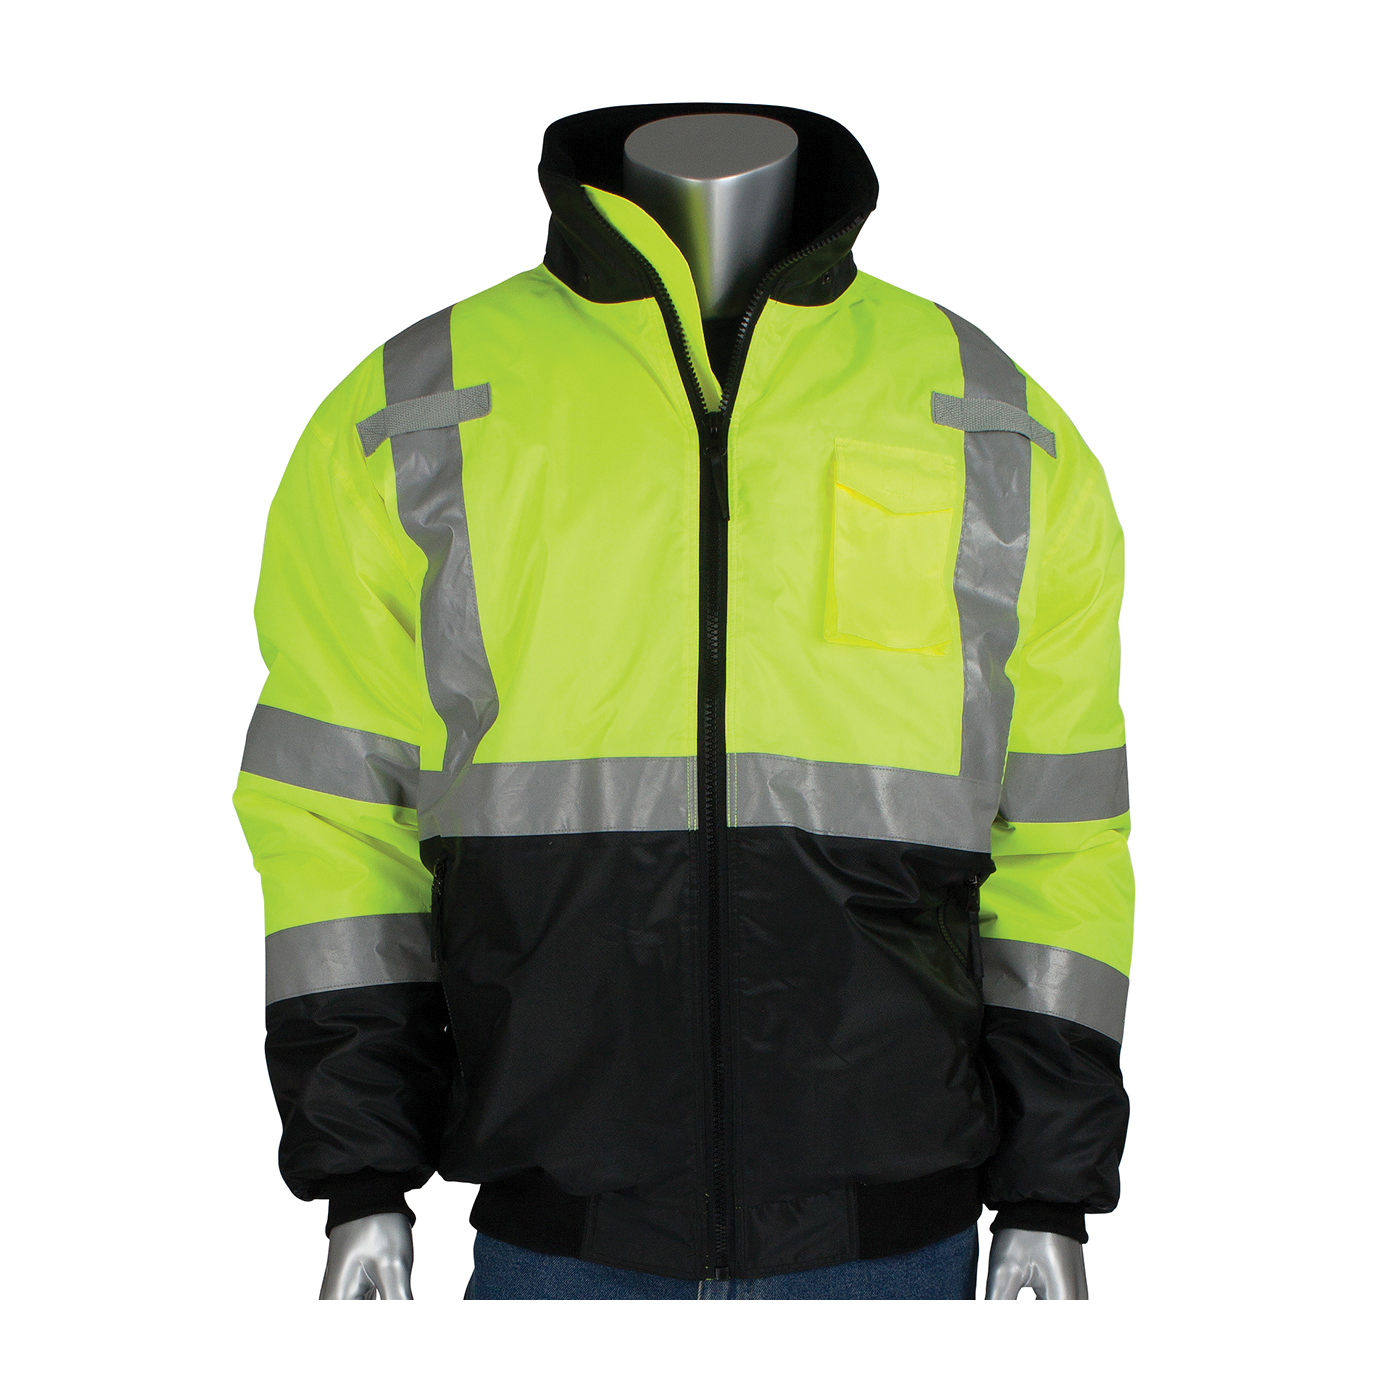 PIP® 333-1740-LY/5X Bomber Jacket, Black/Hi-Viz Lime Yellow, Polyester, 74 in Chest, Resists: Water, ANSI Type R Class 3